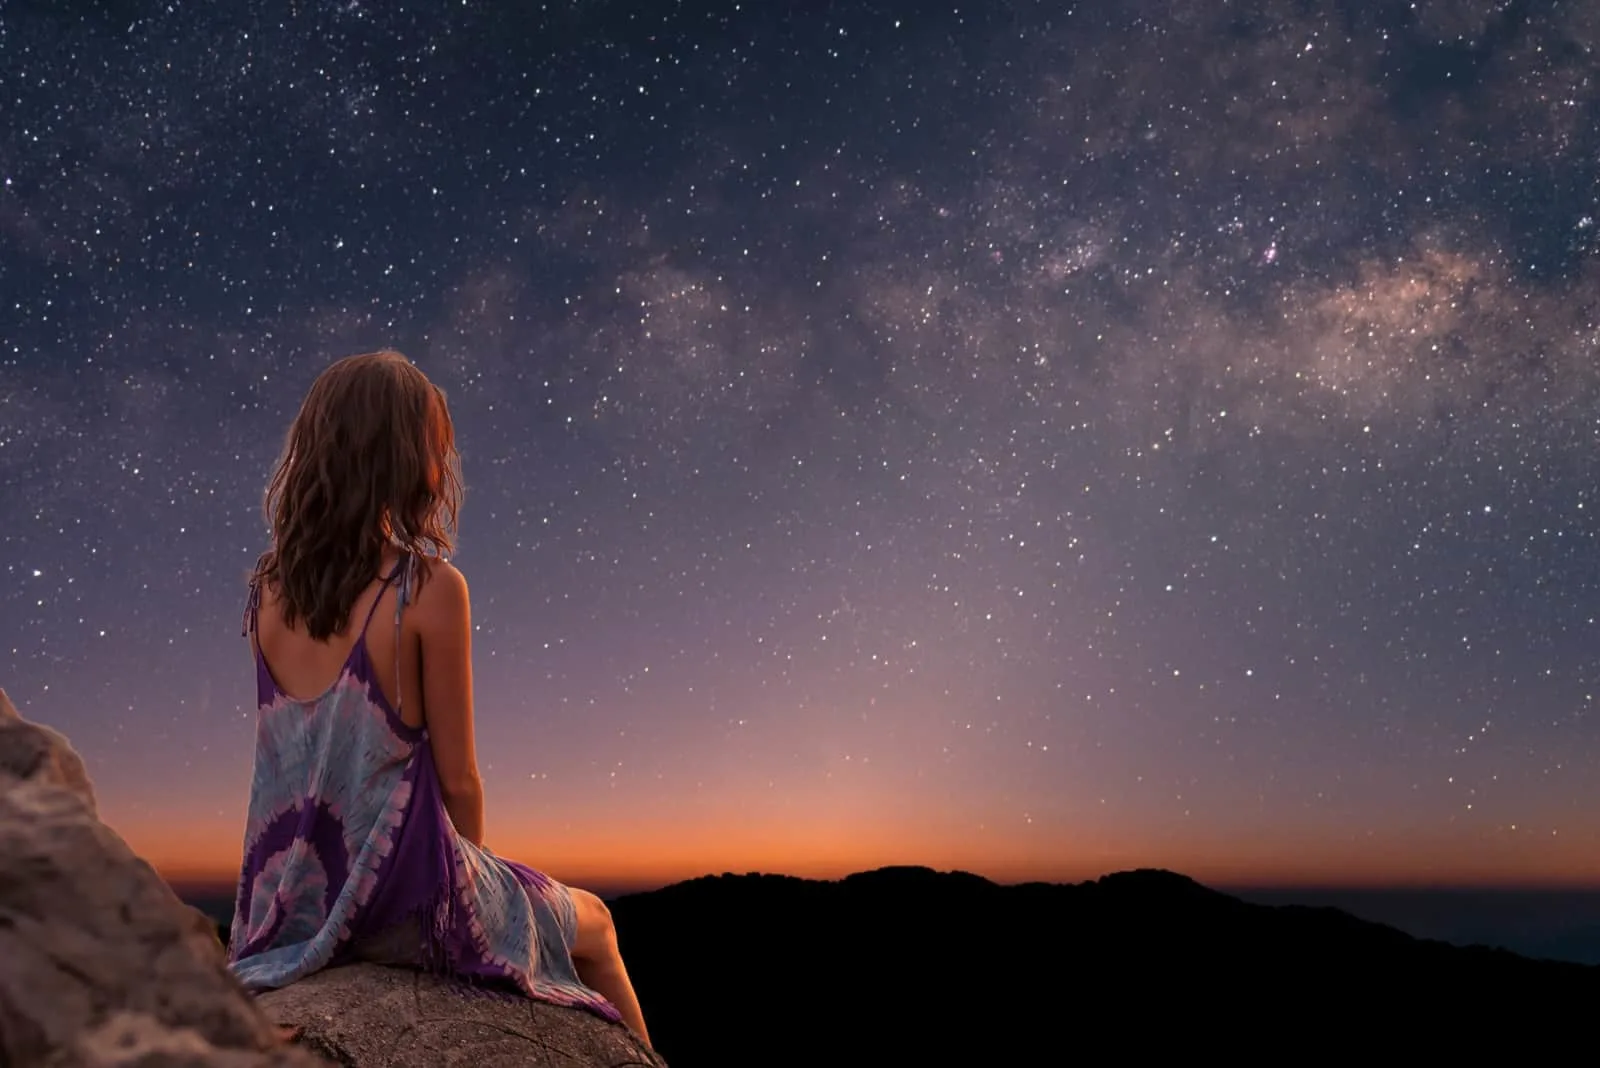 a woman sits on a rock and watches the stars in the sky